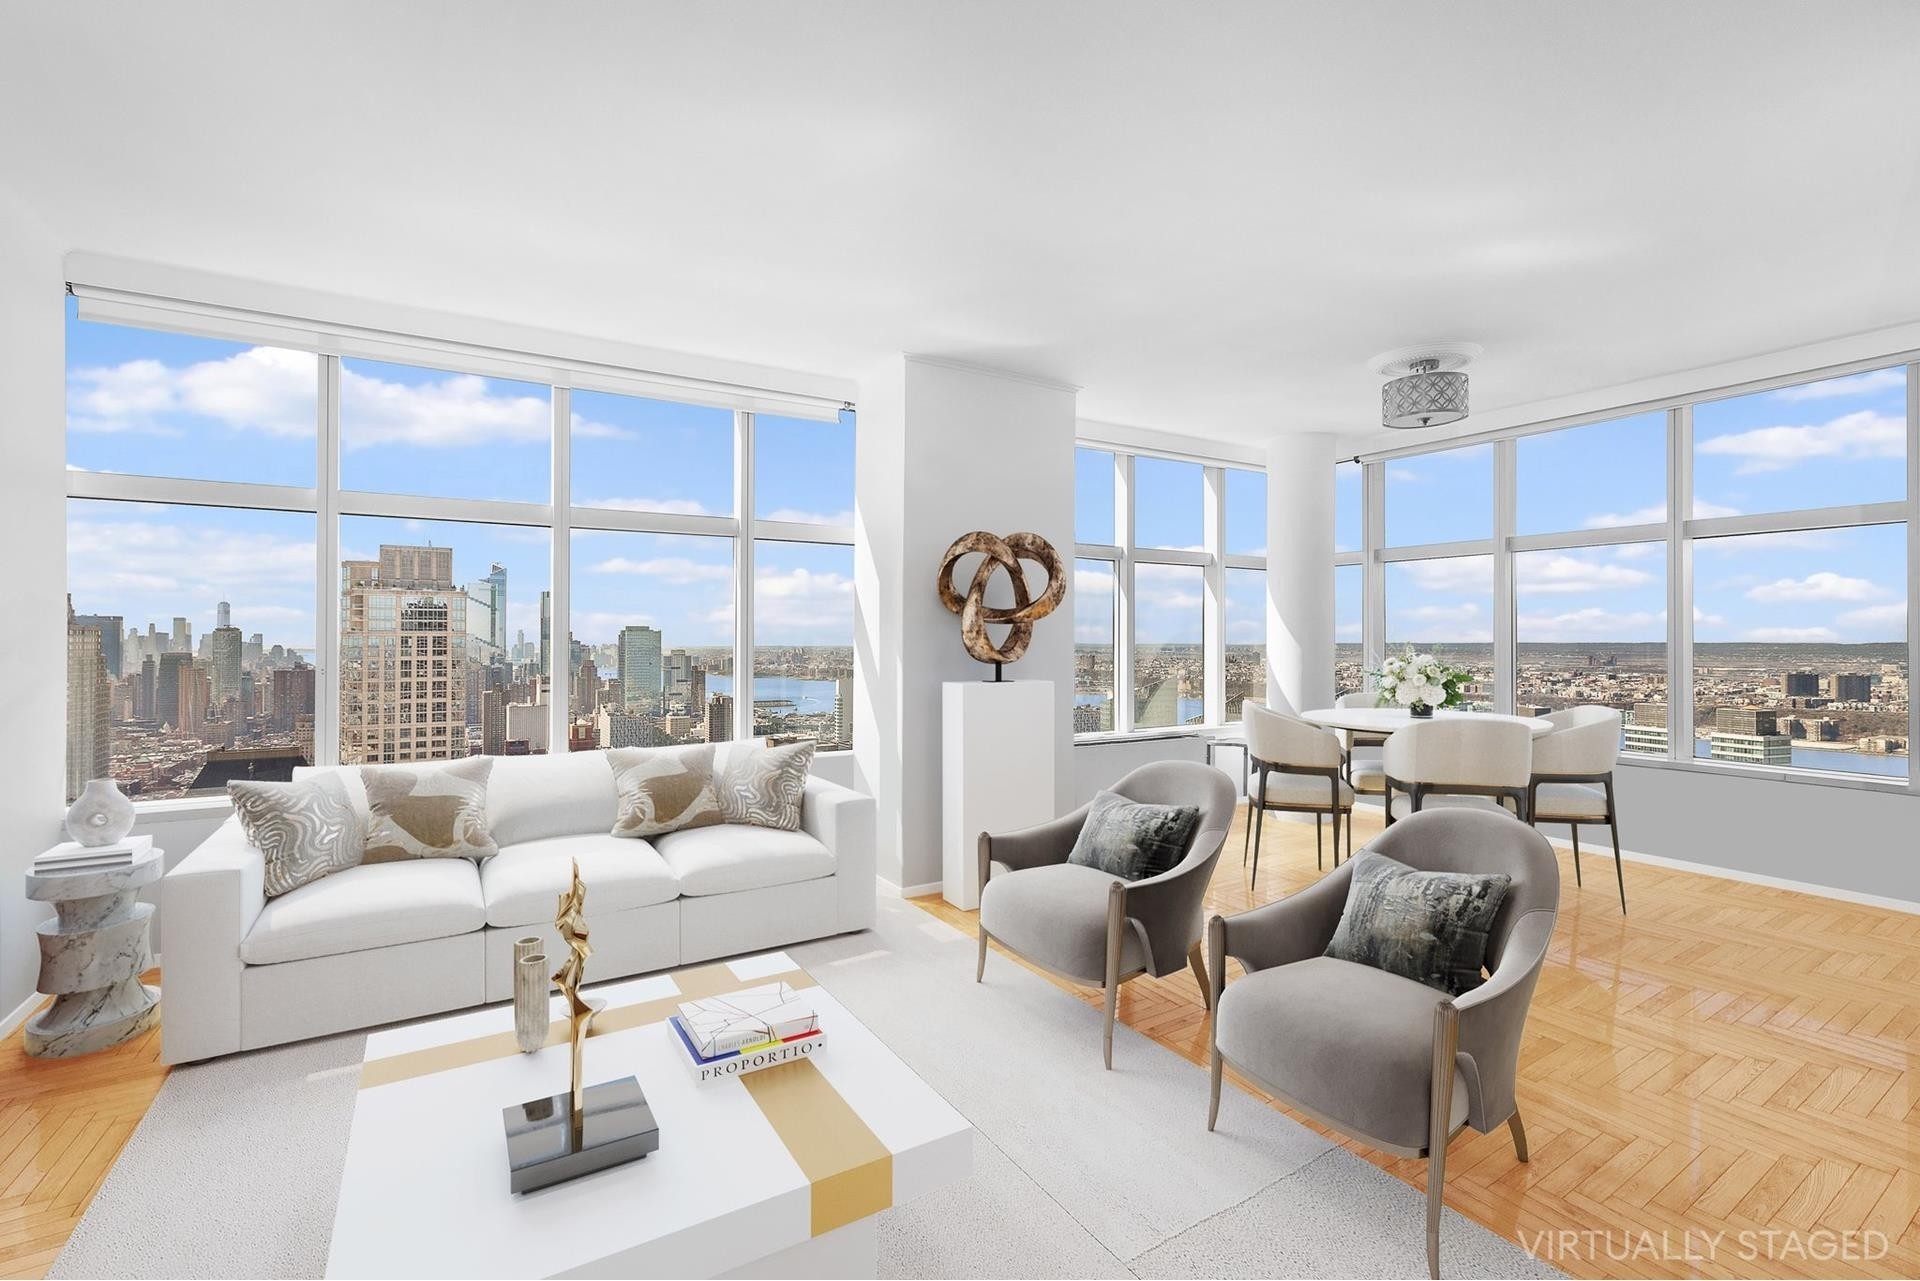 Property at 3 Lincoln Center, 160 W 66TH ST, 56E Lincoln Square, New York, New York 10023